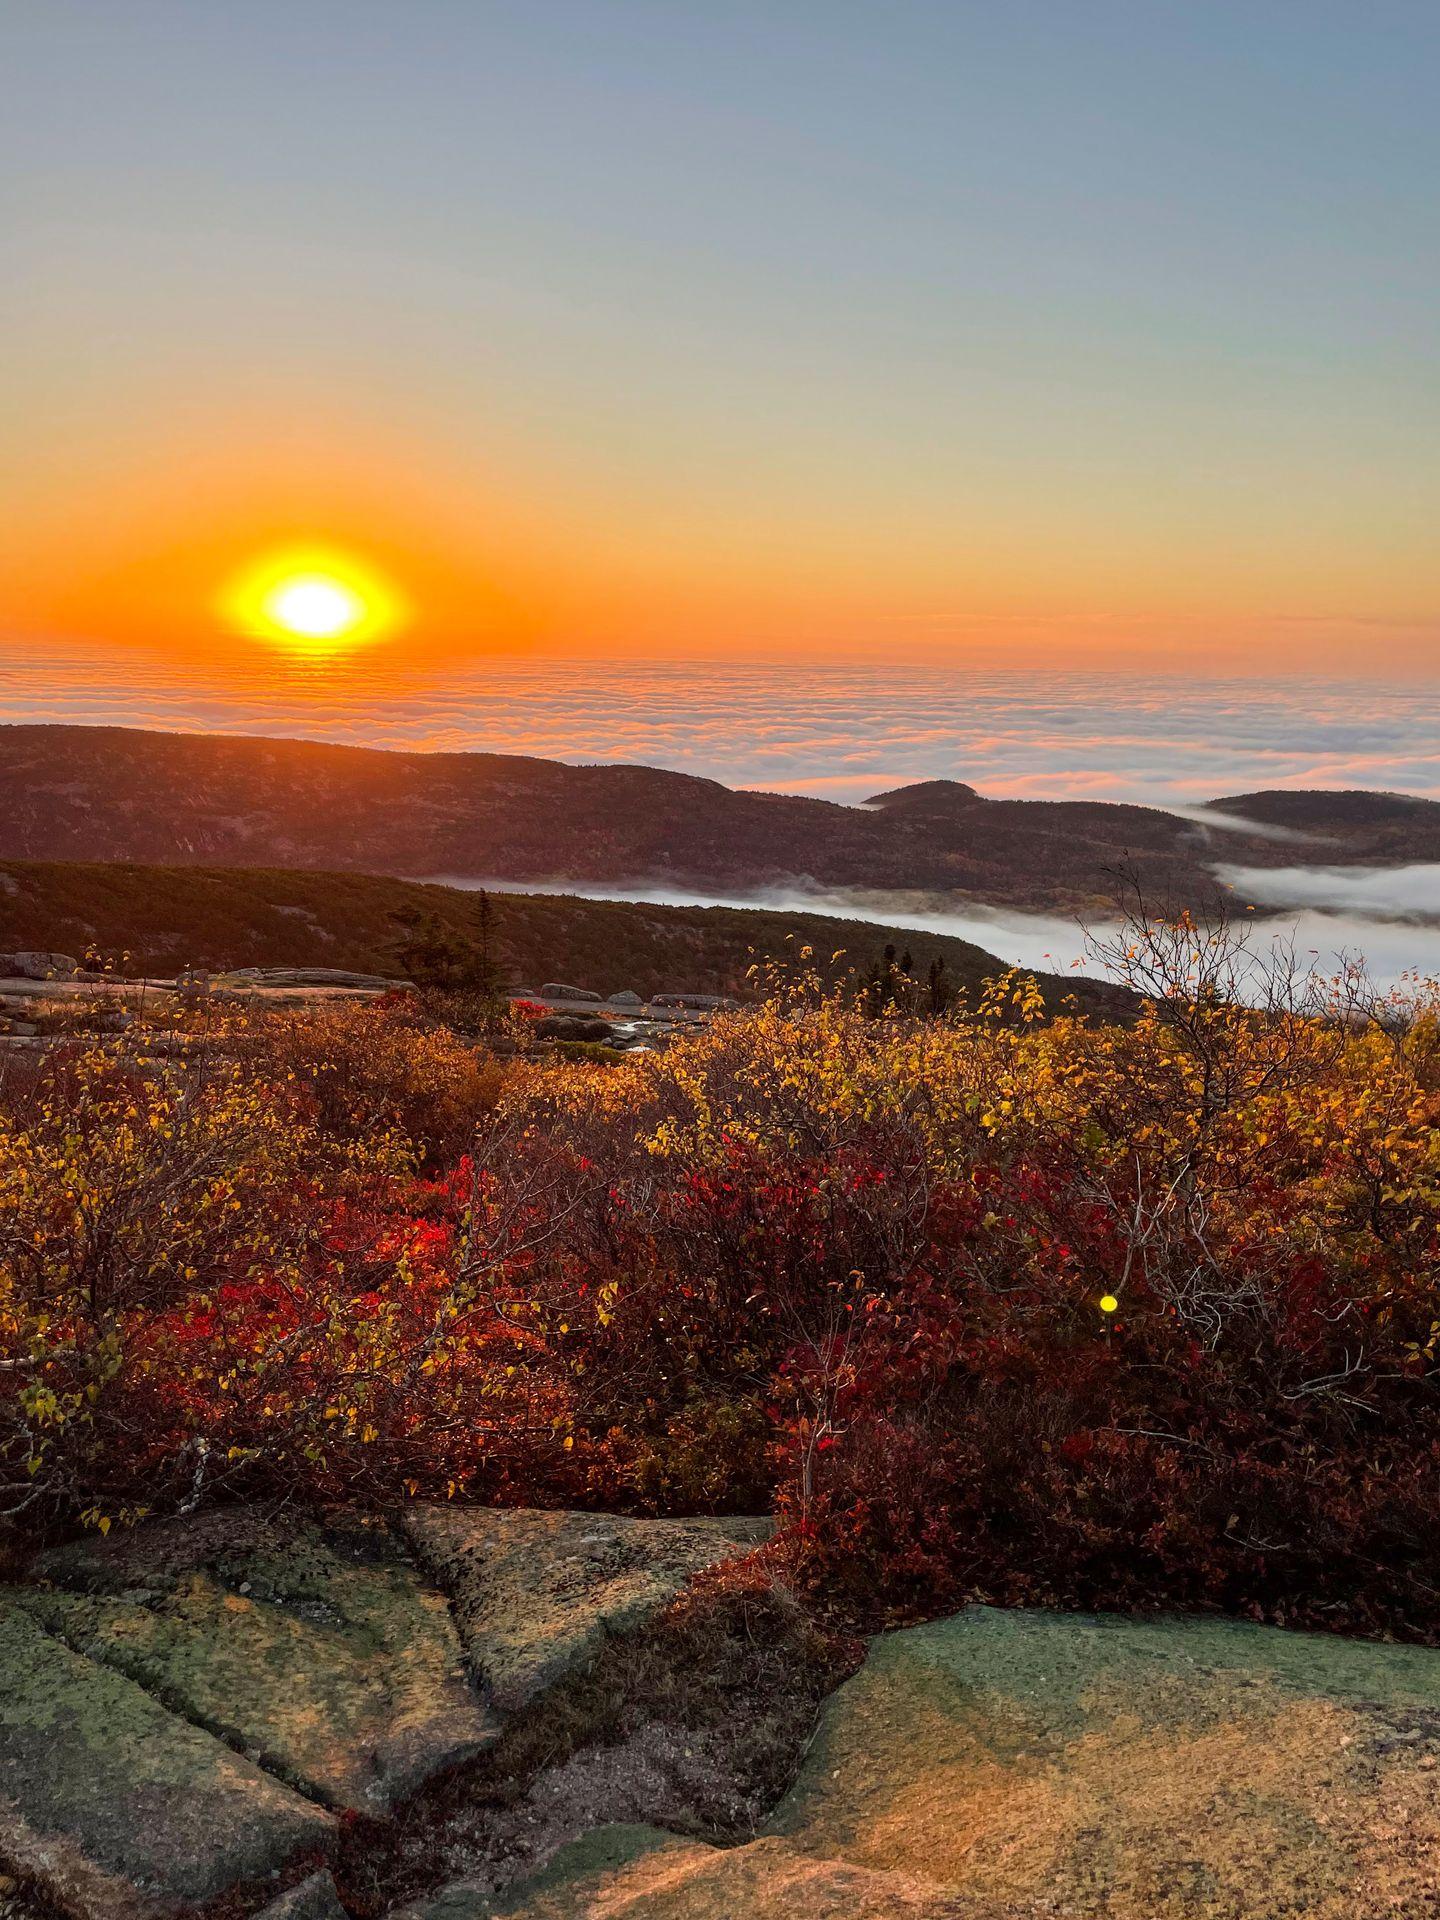 The sunrise seen from the top of Cadillac Mountain